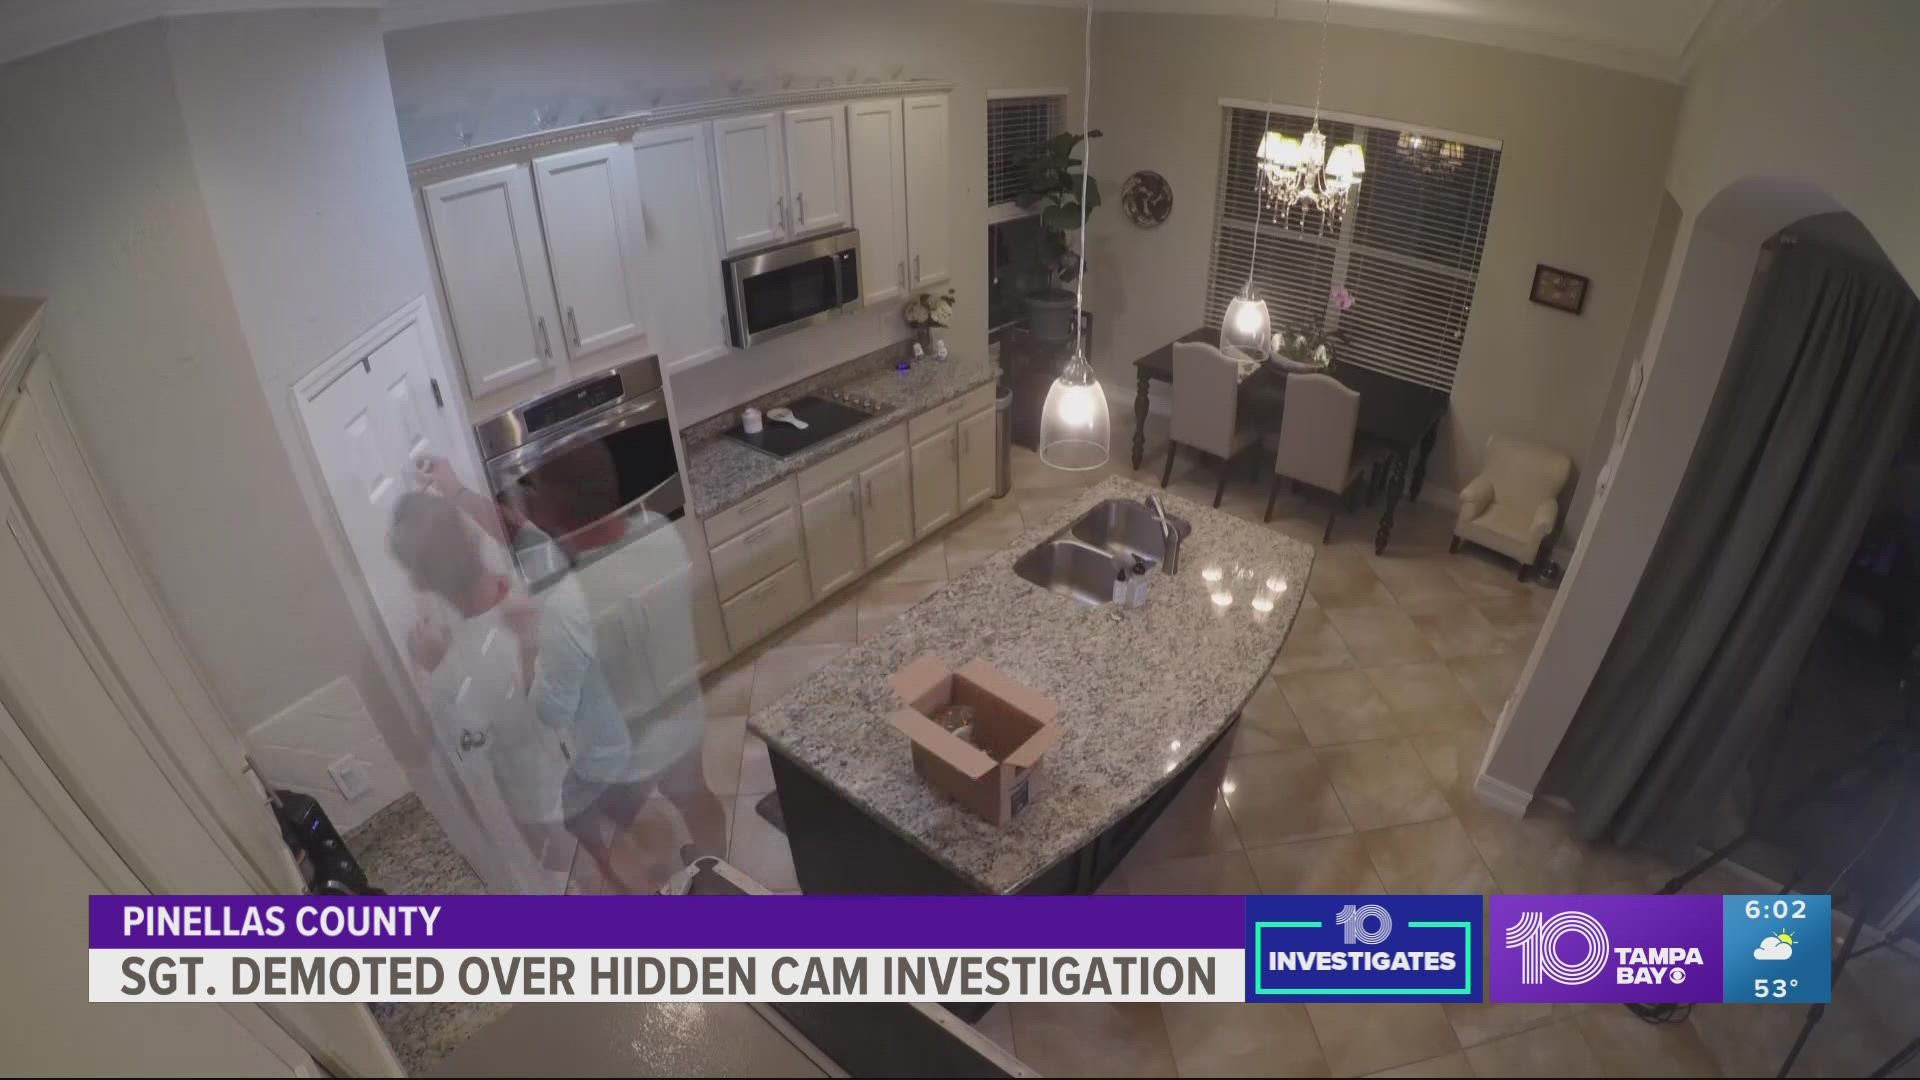 The Pinellas County Sheriff’s Office demoted a sergeant after investigators say he mishandled evidence at a video voyeurism crime scene.